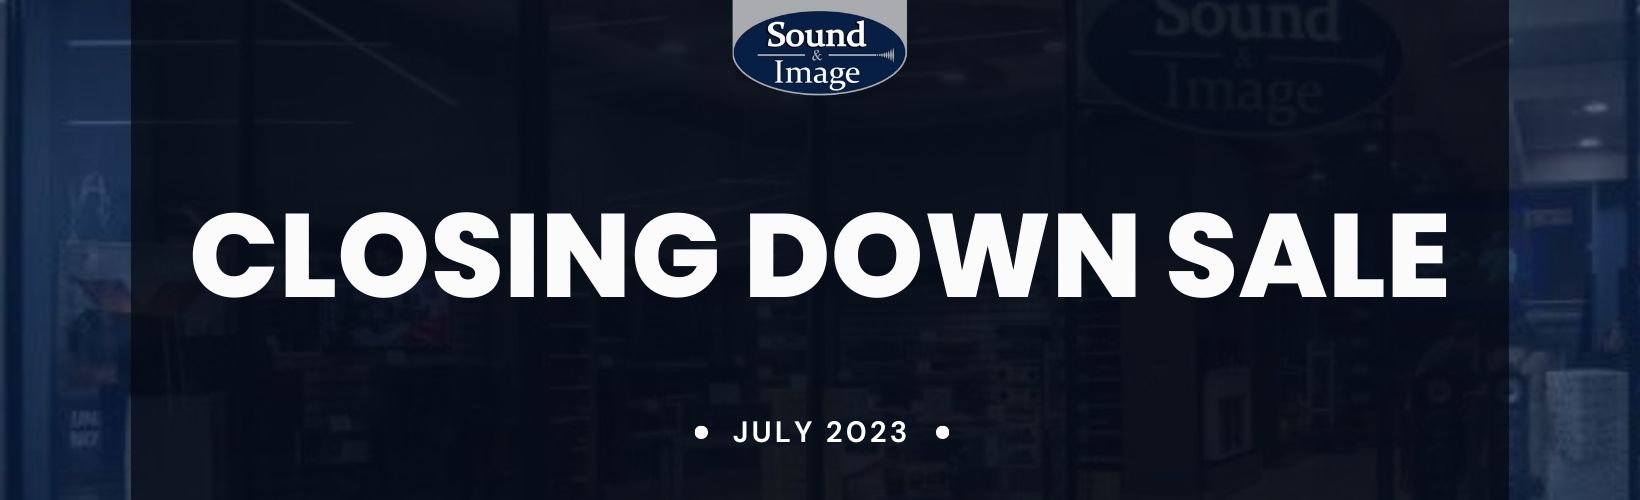 Sound & Image Closing Sale (Facebook Cover) (1640 × 500 px)